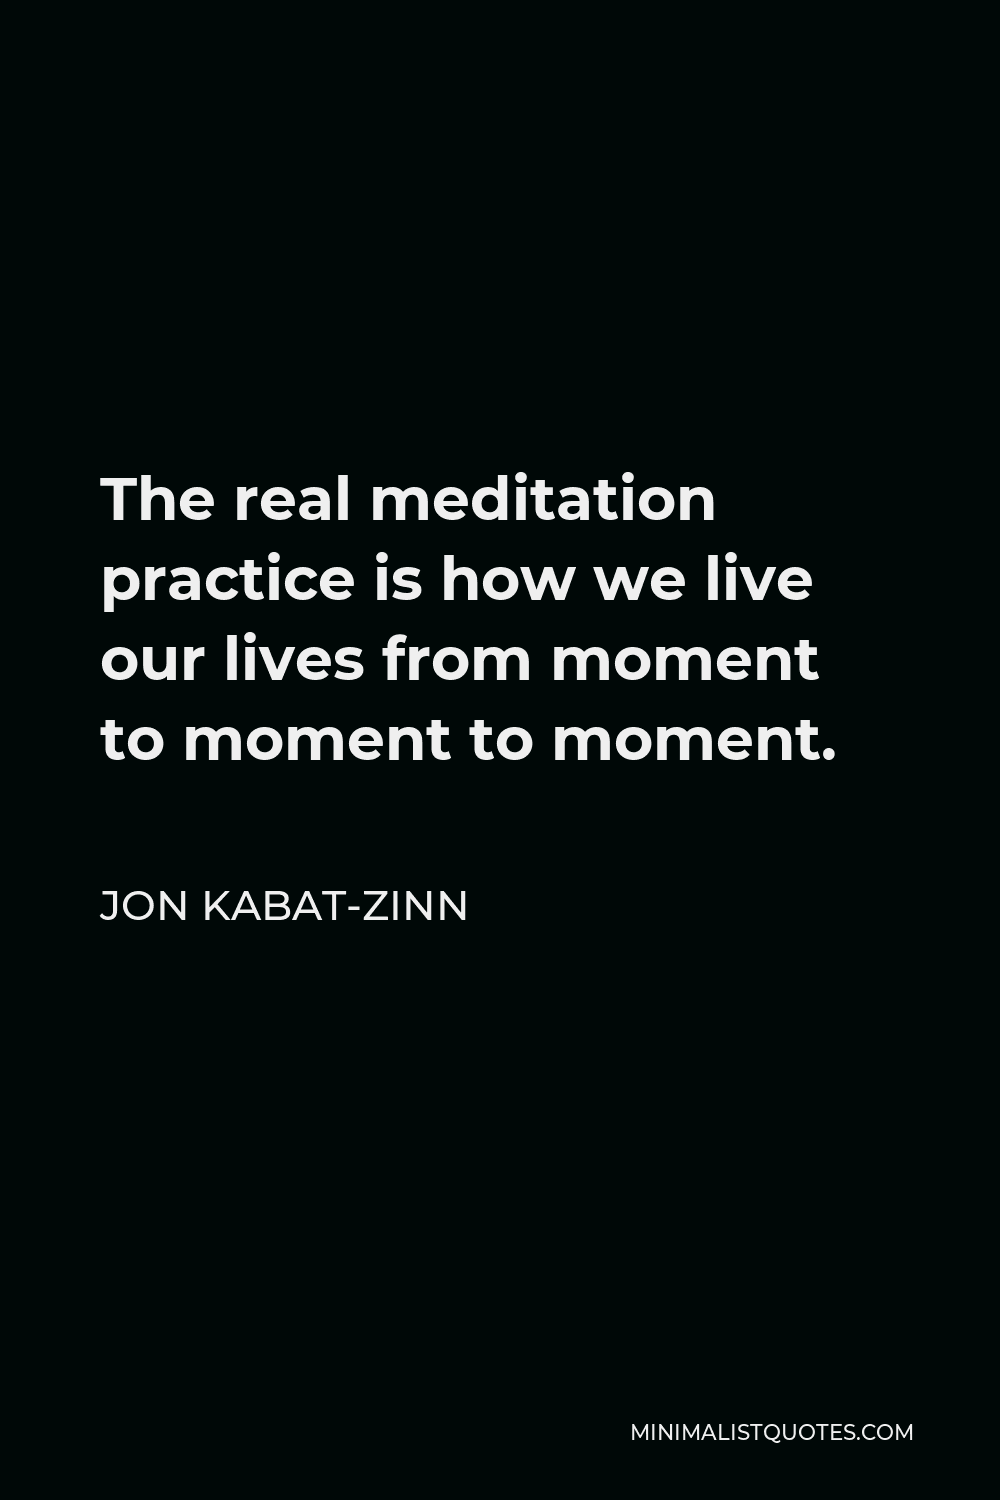 Jon Kabat-Zinn Quote - The real meditation practice is how we live our lives from moment to moment to moment.